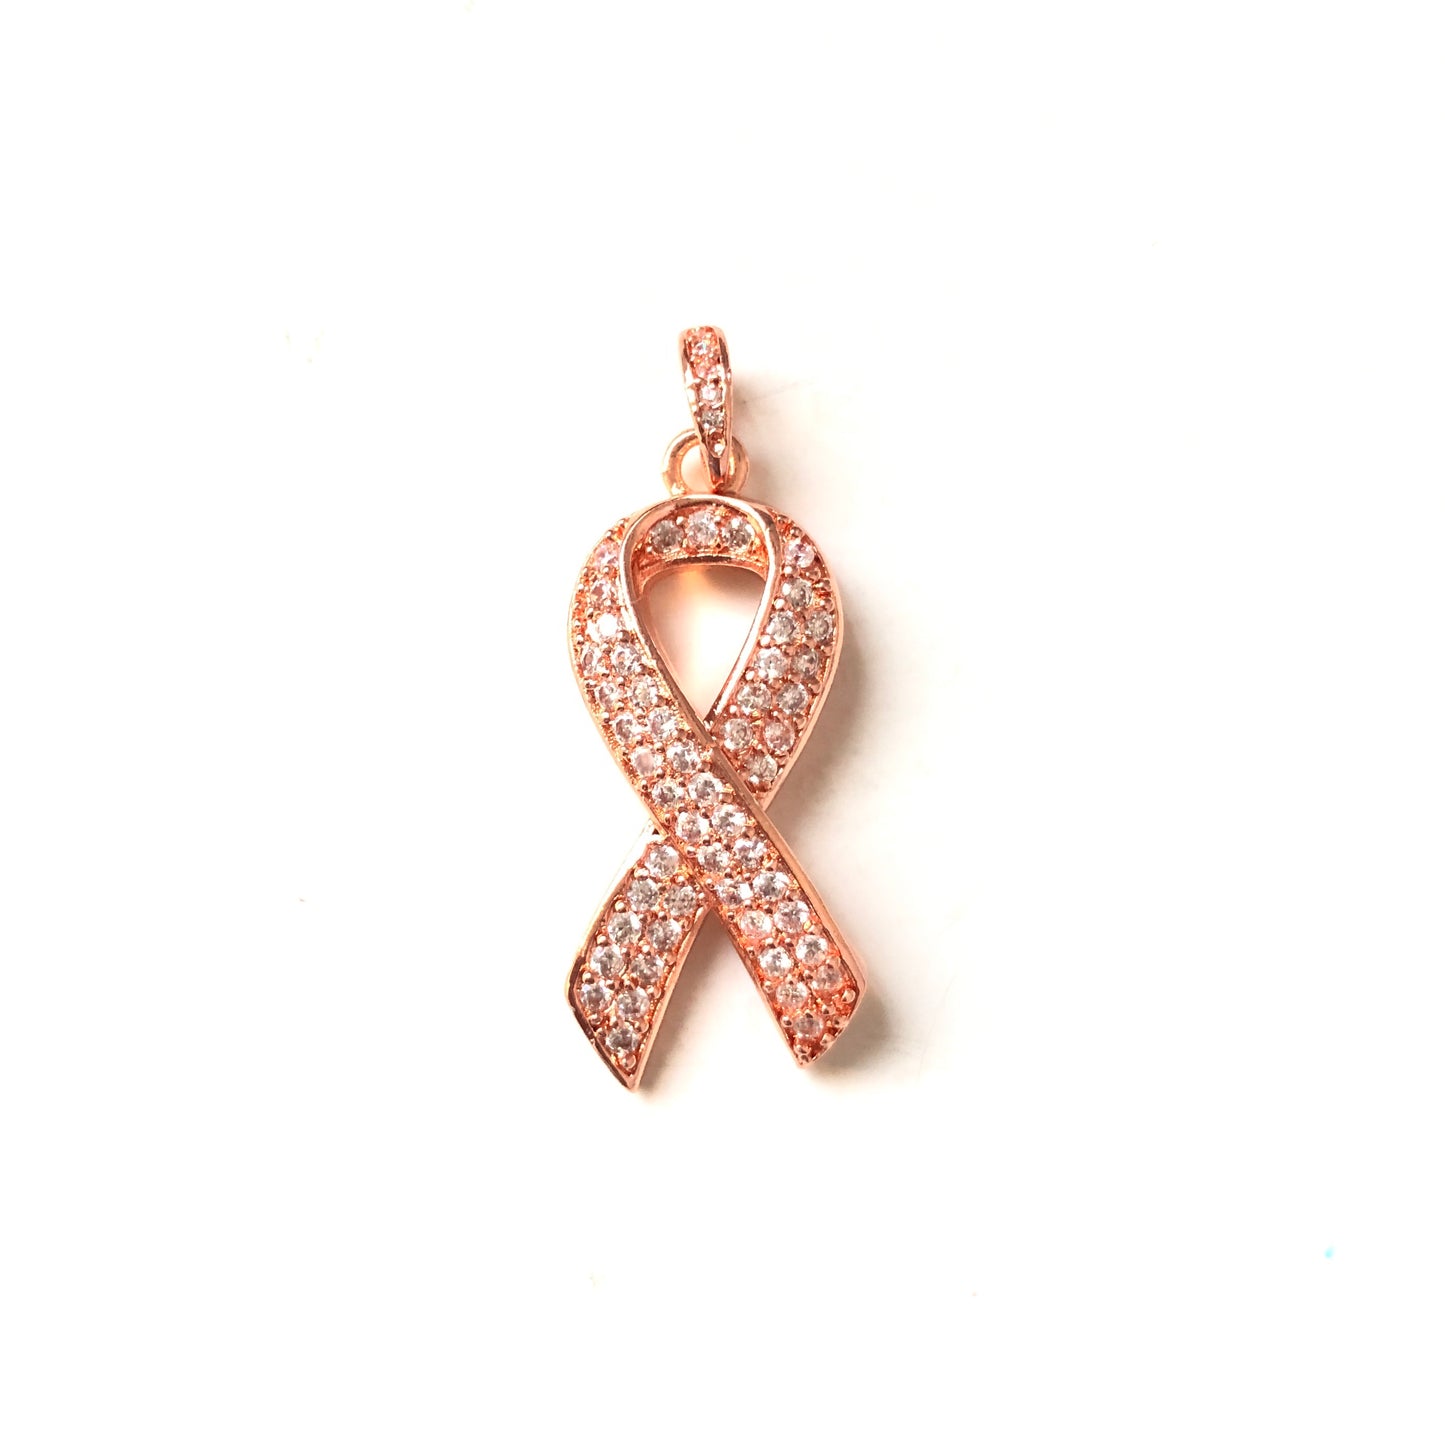 10pcs/lot 27*13mm CZ Paved Pink Ribbon Breast Cancer Awareness Charms Rose Gold CZ Paved Charms Breast Cancer Awareness Charms Beads Beyond